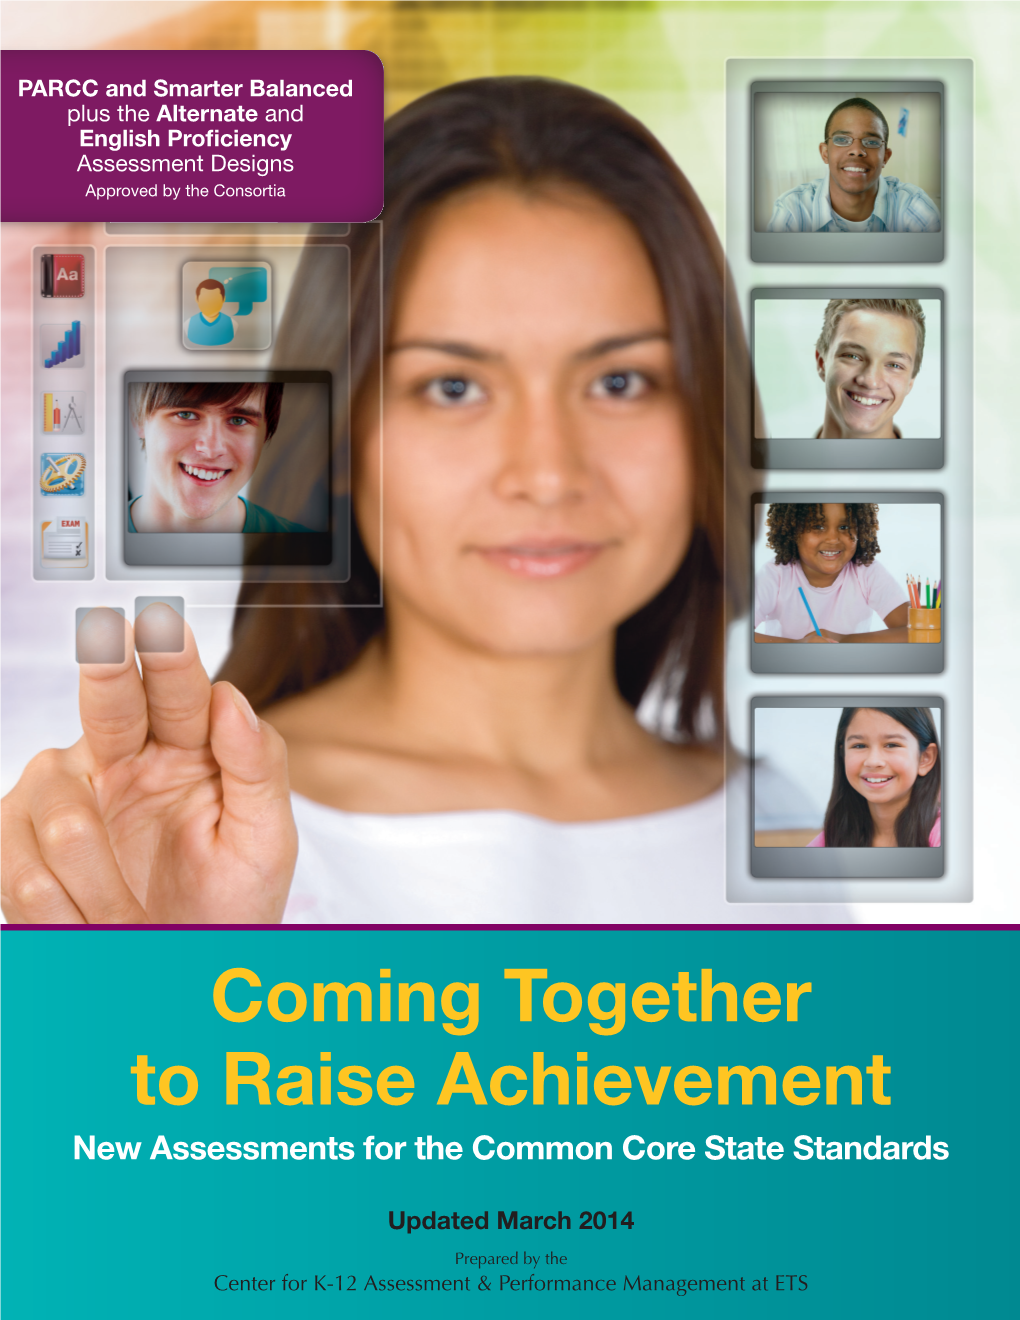 Coming Together to Raise Achievement: New Assessments for the Common Core State Standards (March 2014)